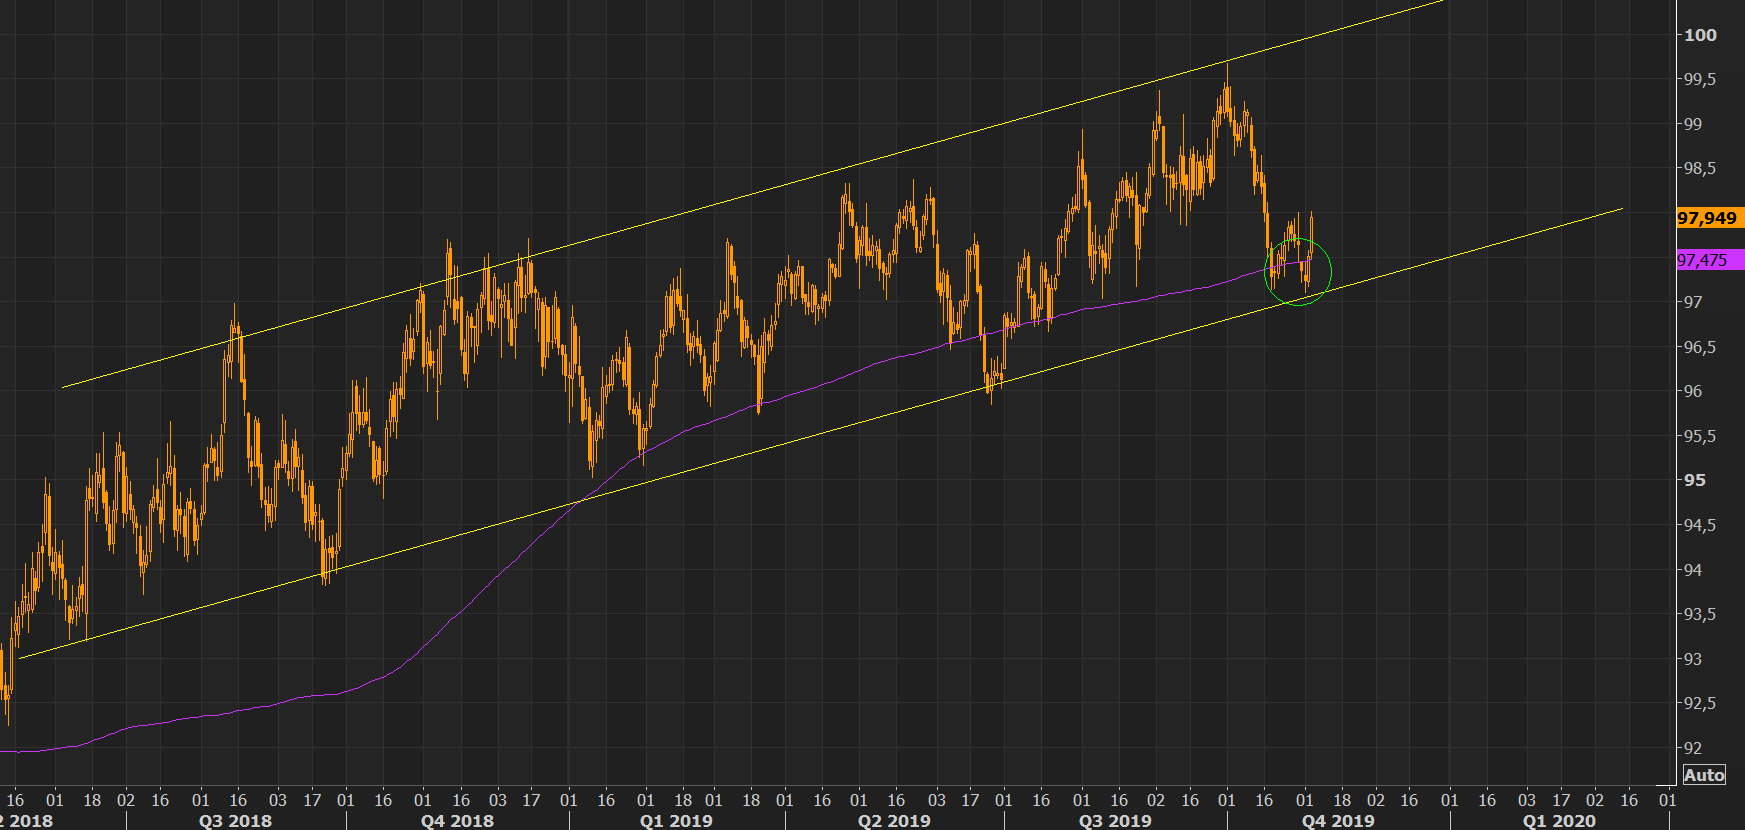 Mighty USD - who did not point out the DXY about to break down last week, but once again the crowd is fooled